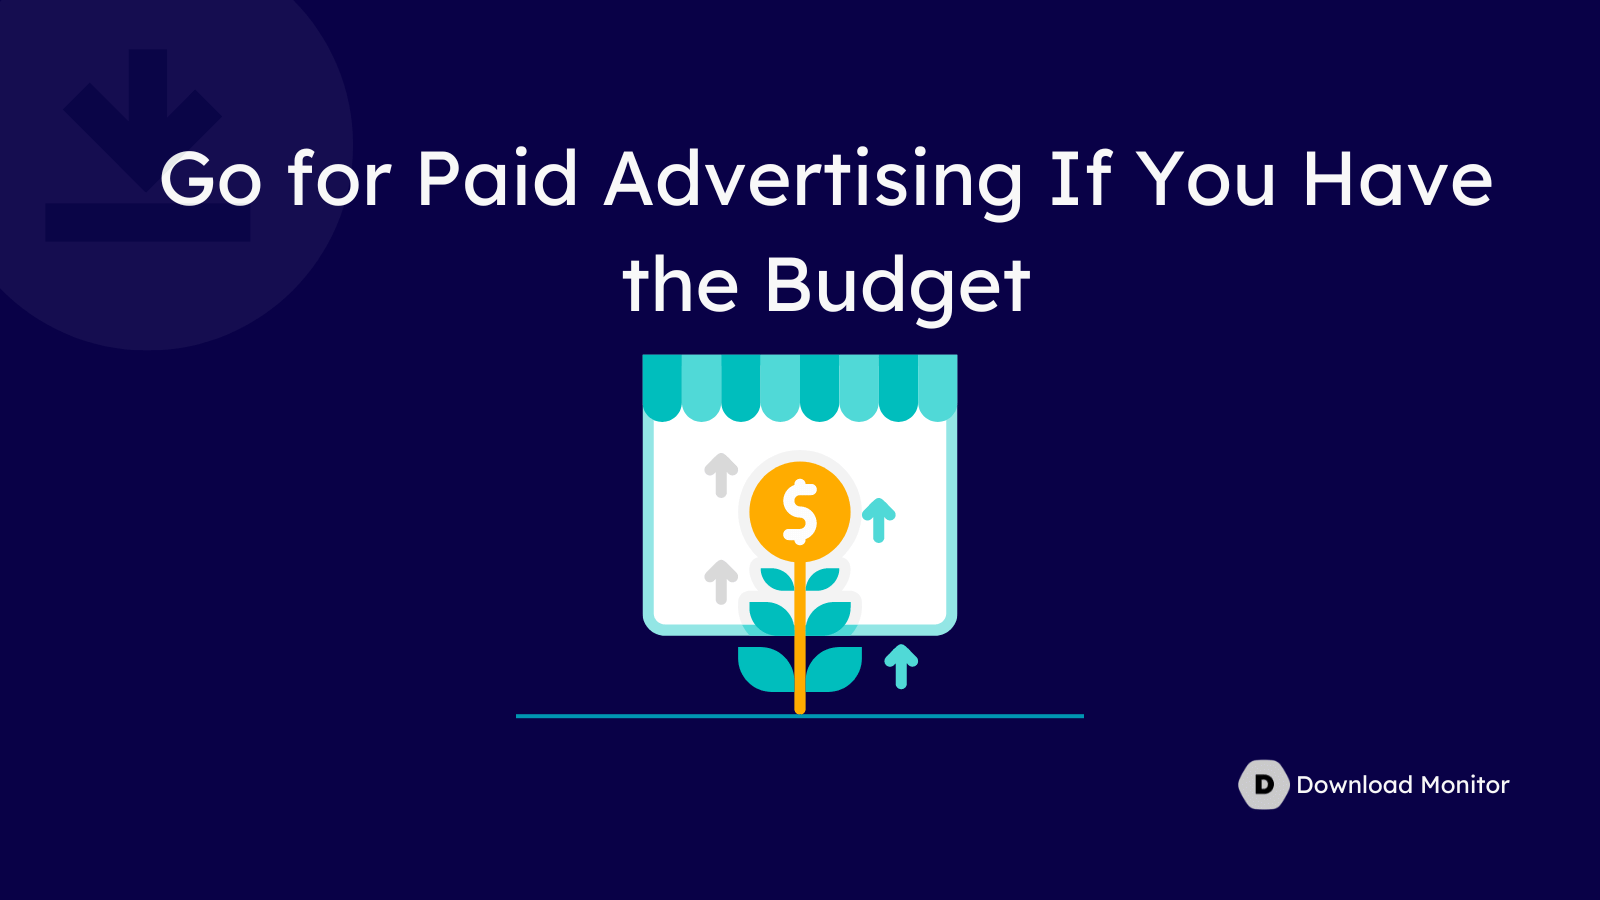 Go for Paid Advertising If You Have the Budget